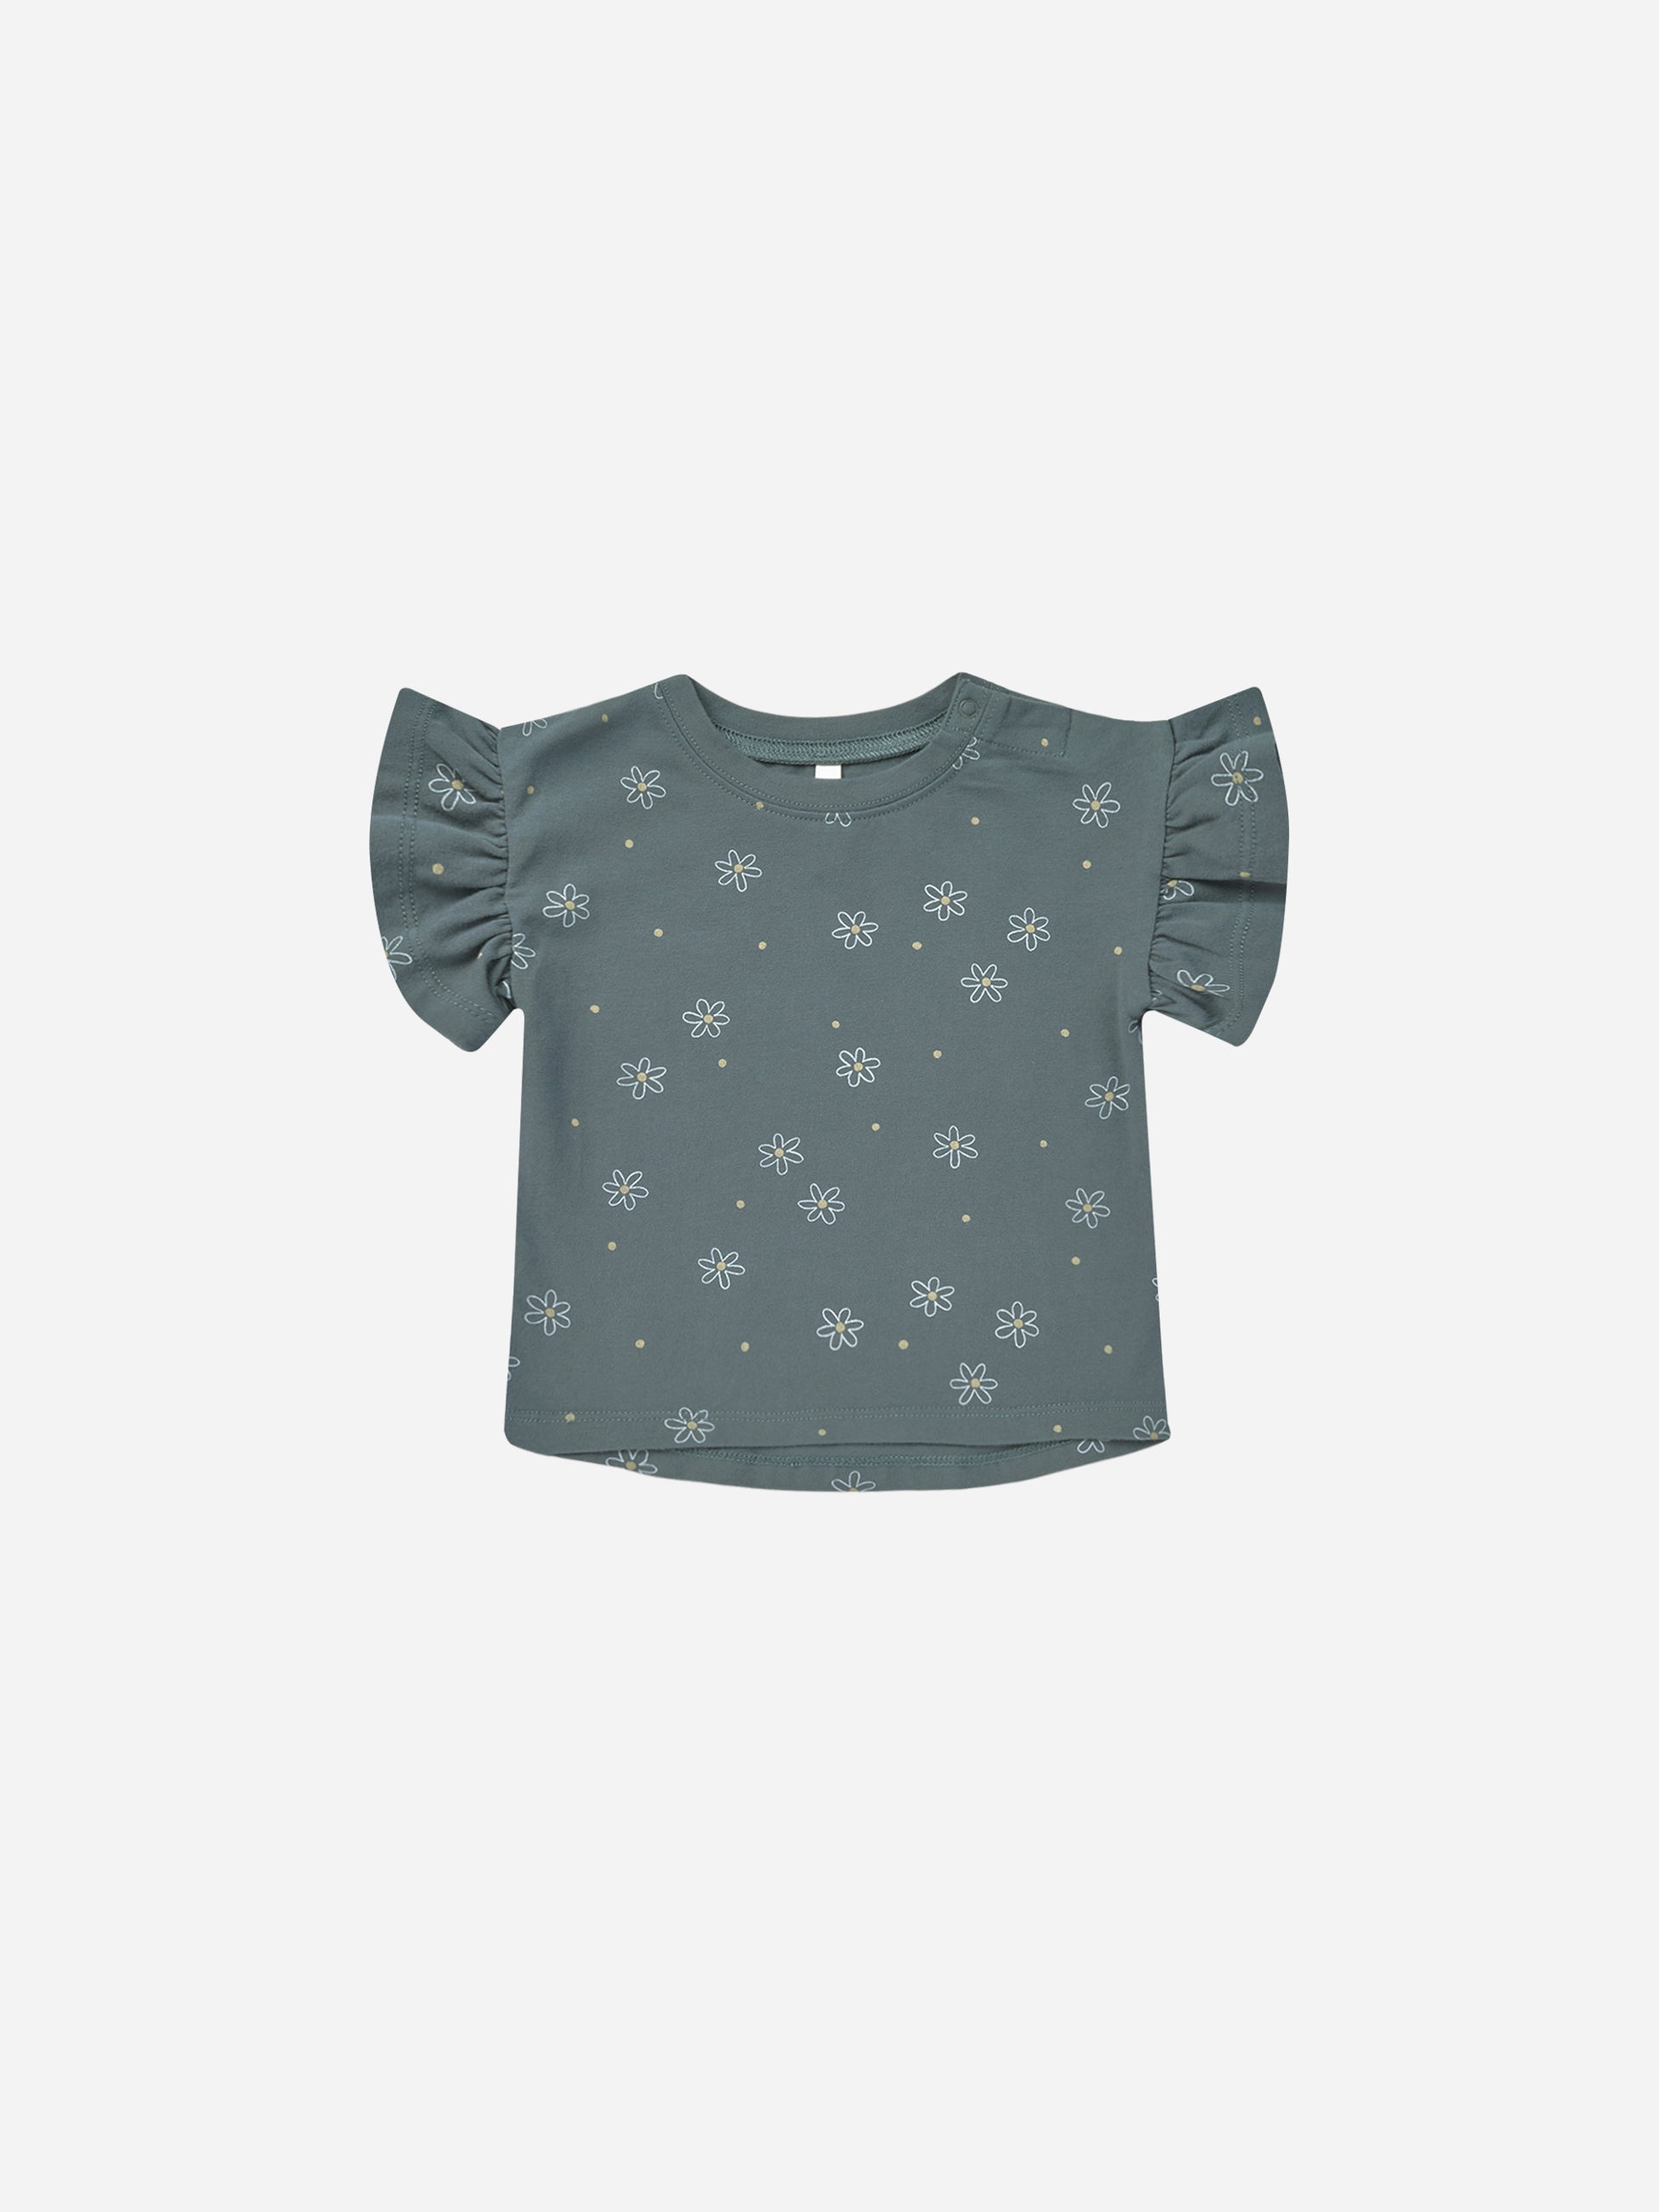 Flutter Tee || Daisies - Rylee + Cru | Kids Clothes | Trendy Baby Clothes | Modern Infant Outfits |